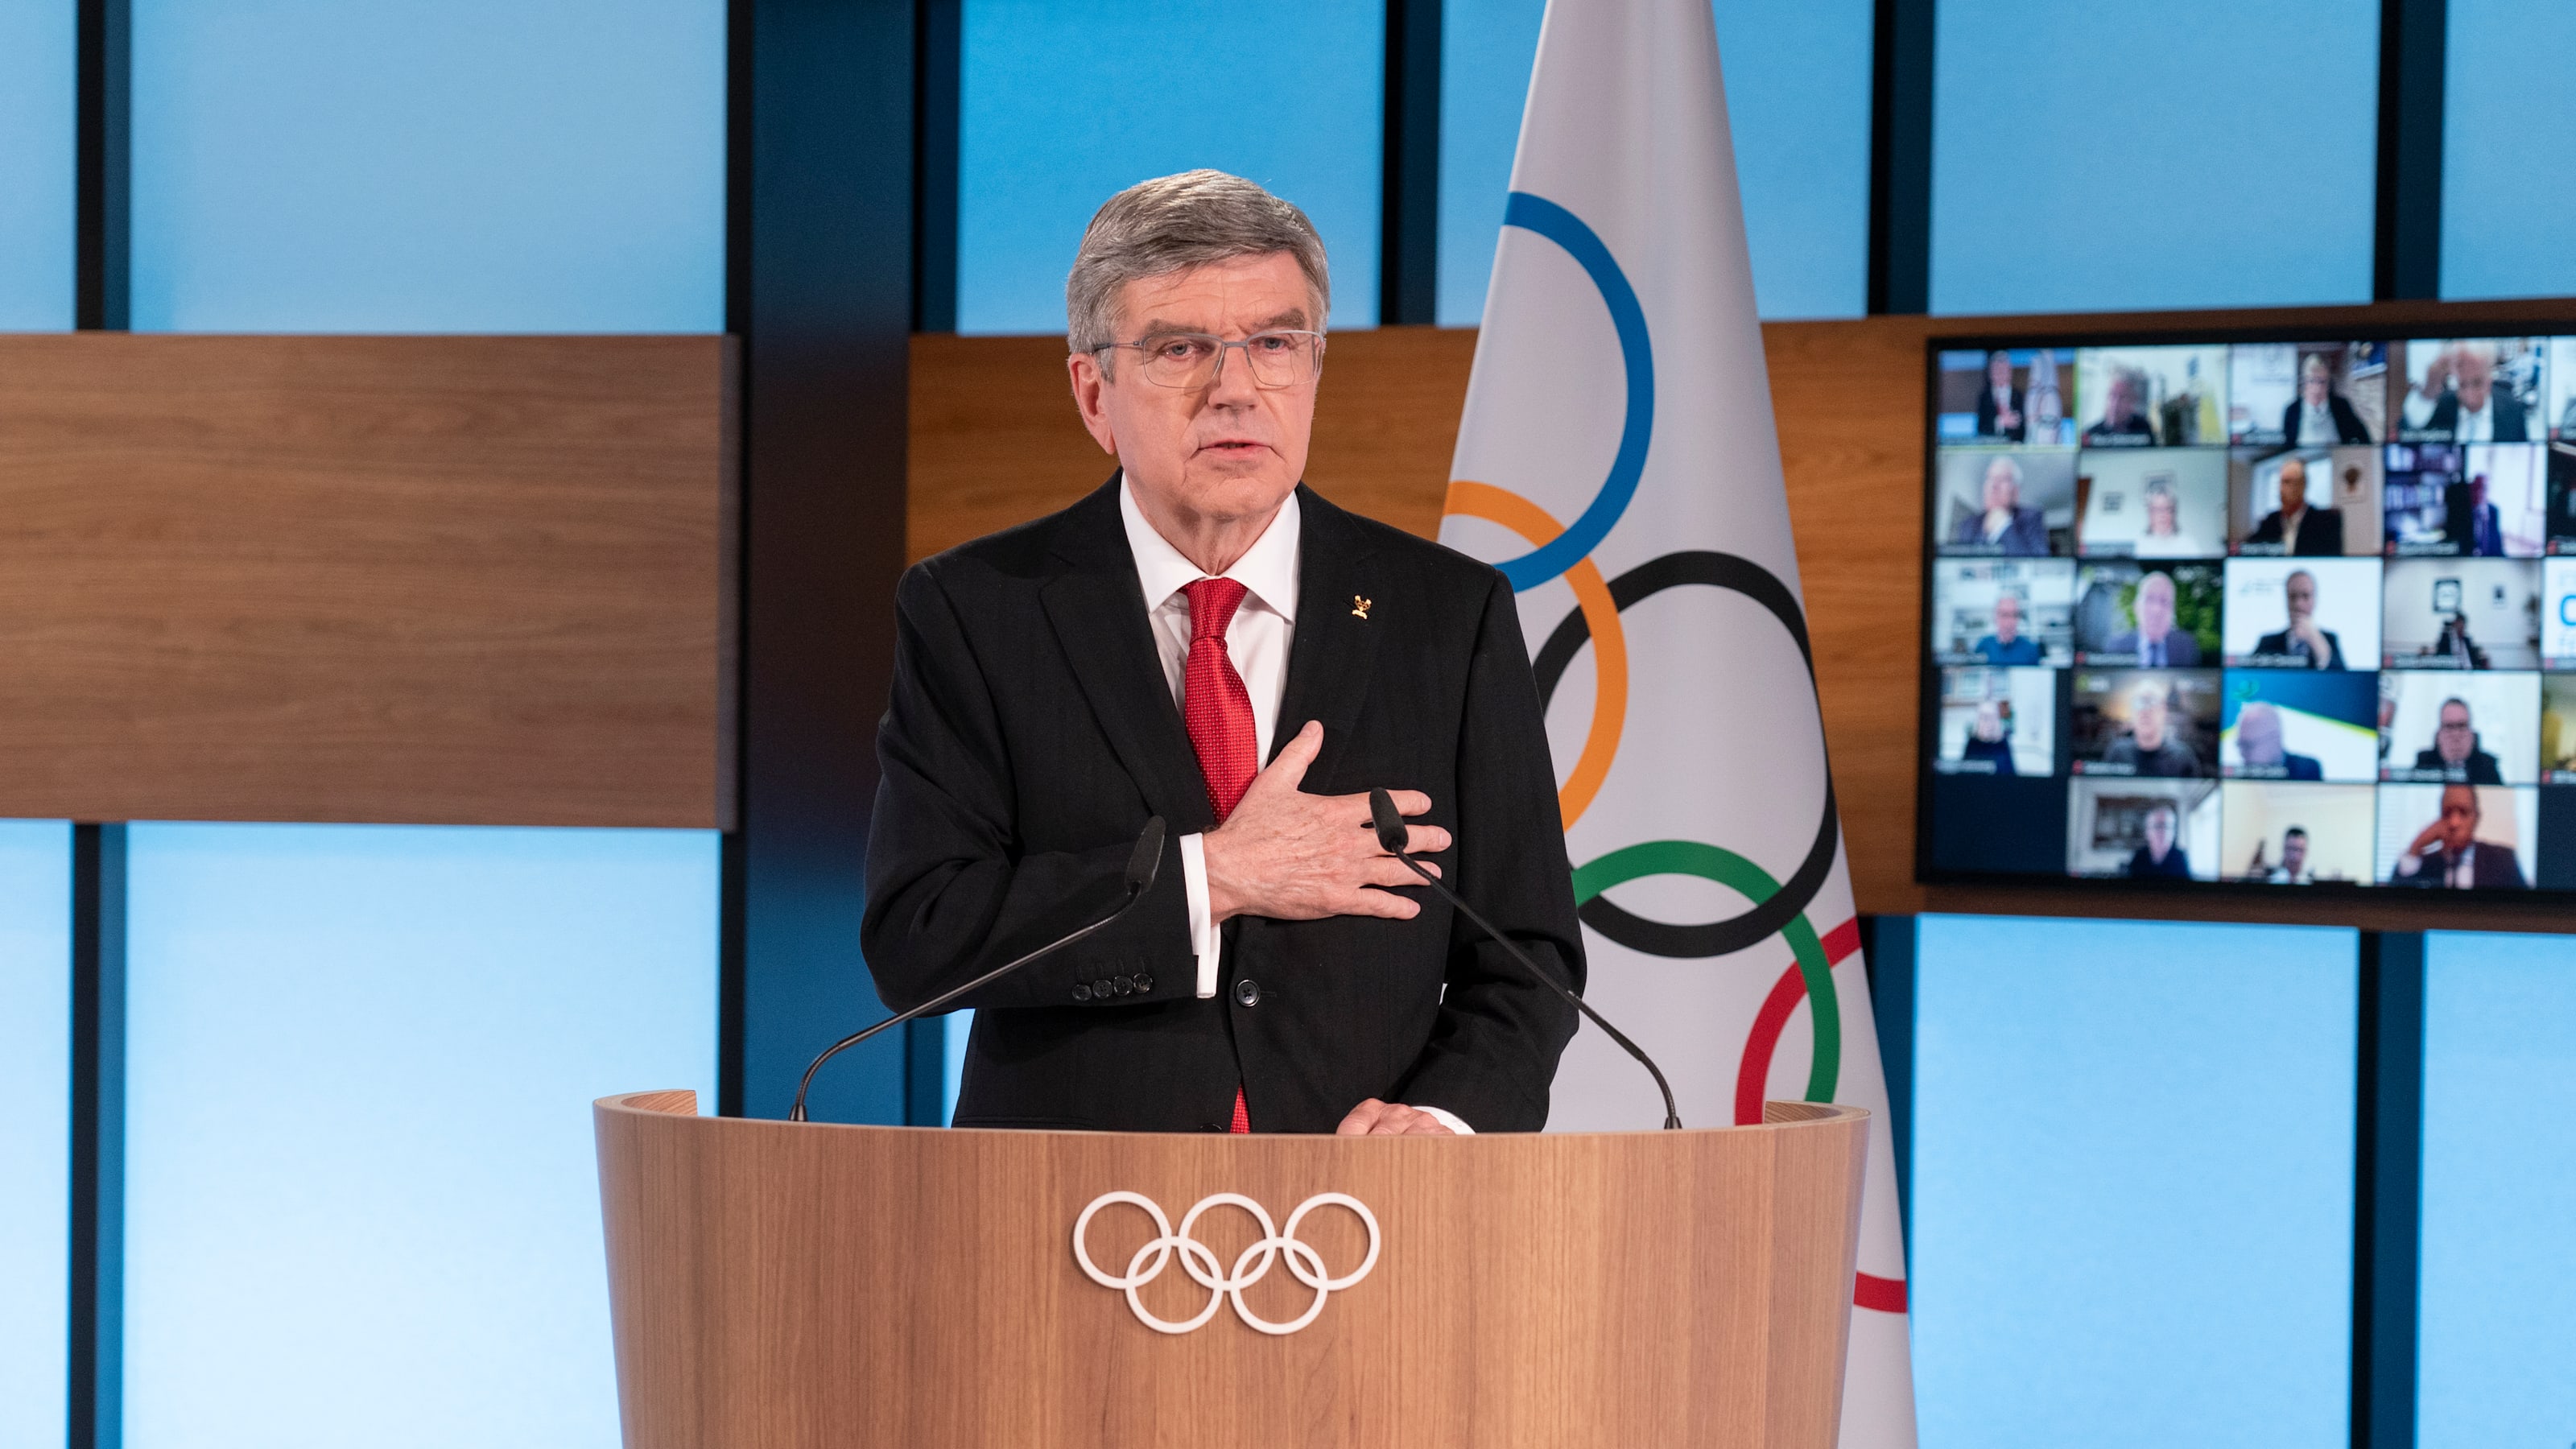 IOC President Thomas Bach re-elected for additional four years